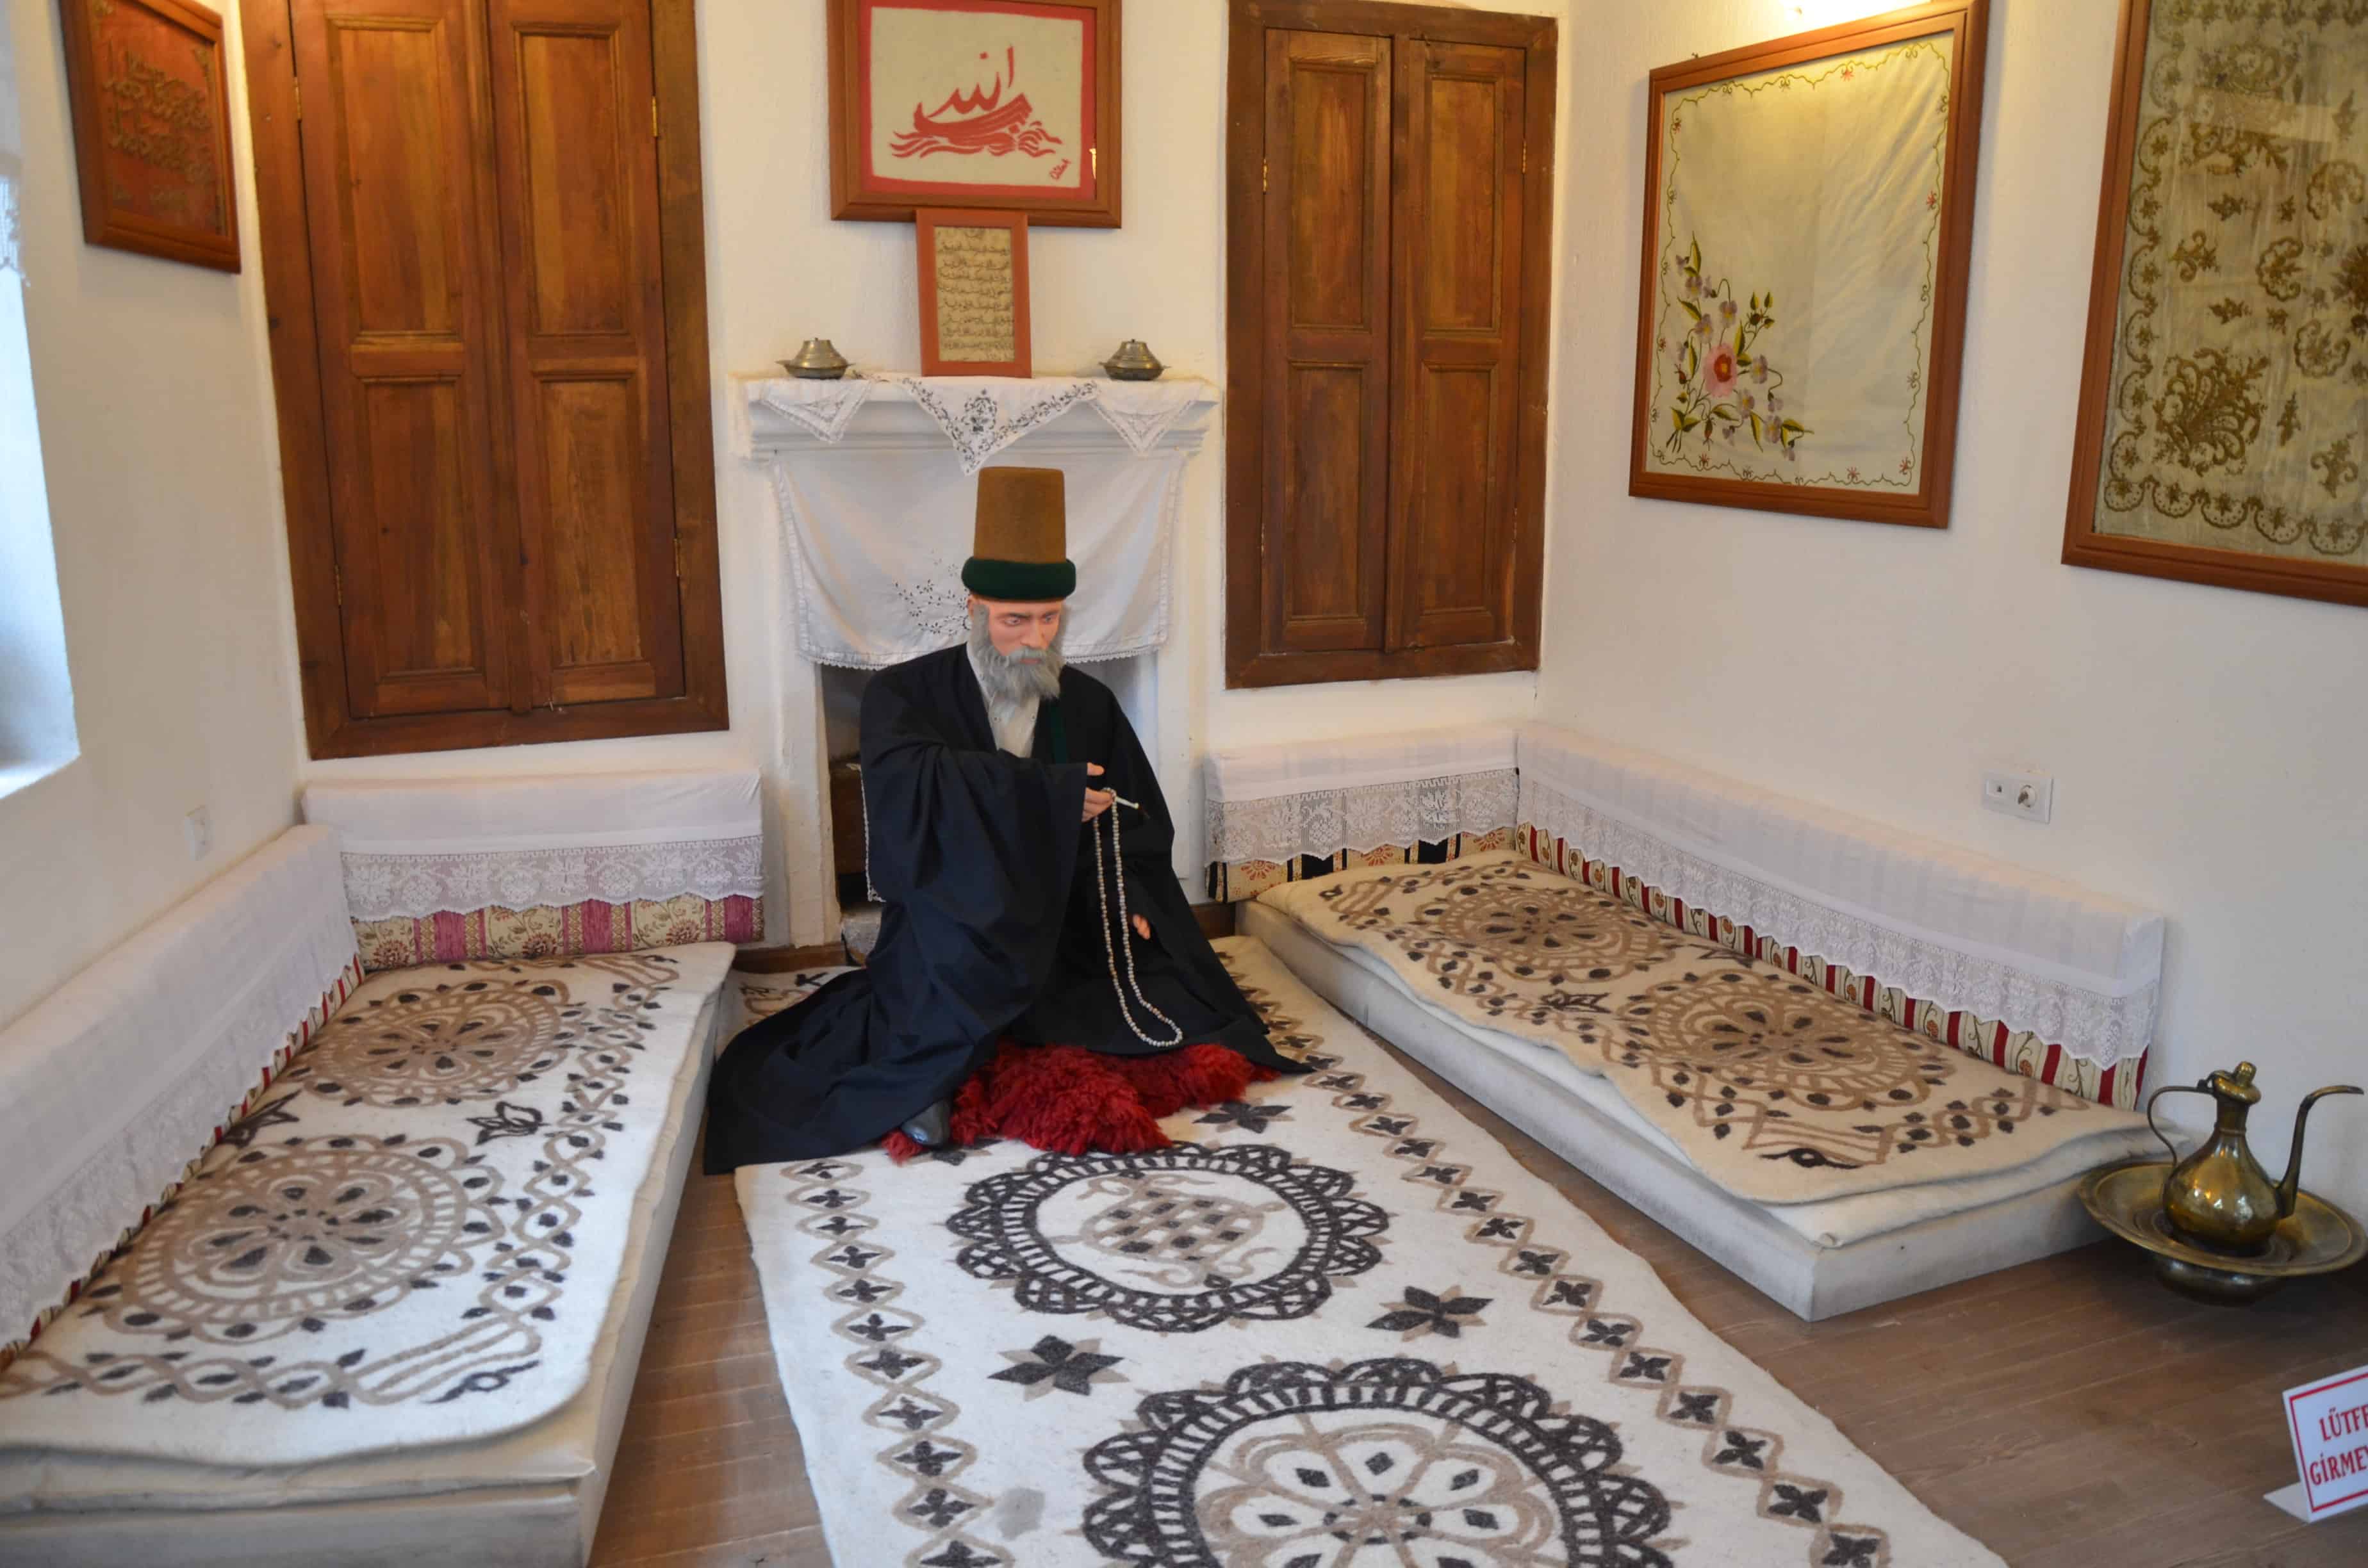 Private cell at the Sultan Divani Mevlevi Lodge Museum